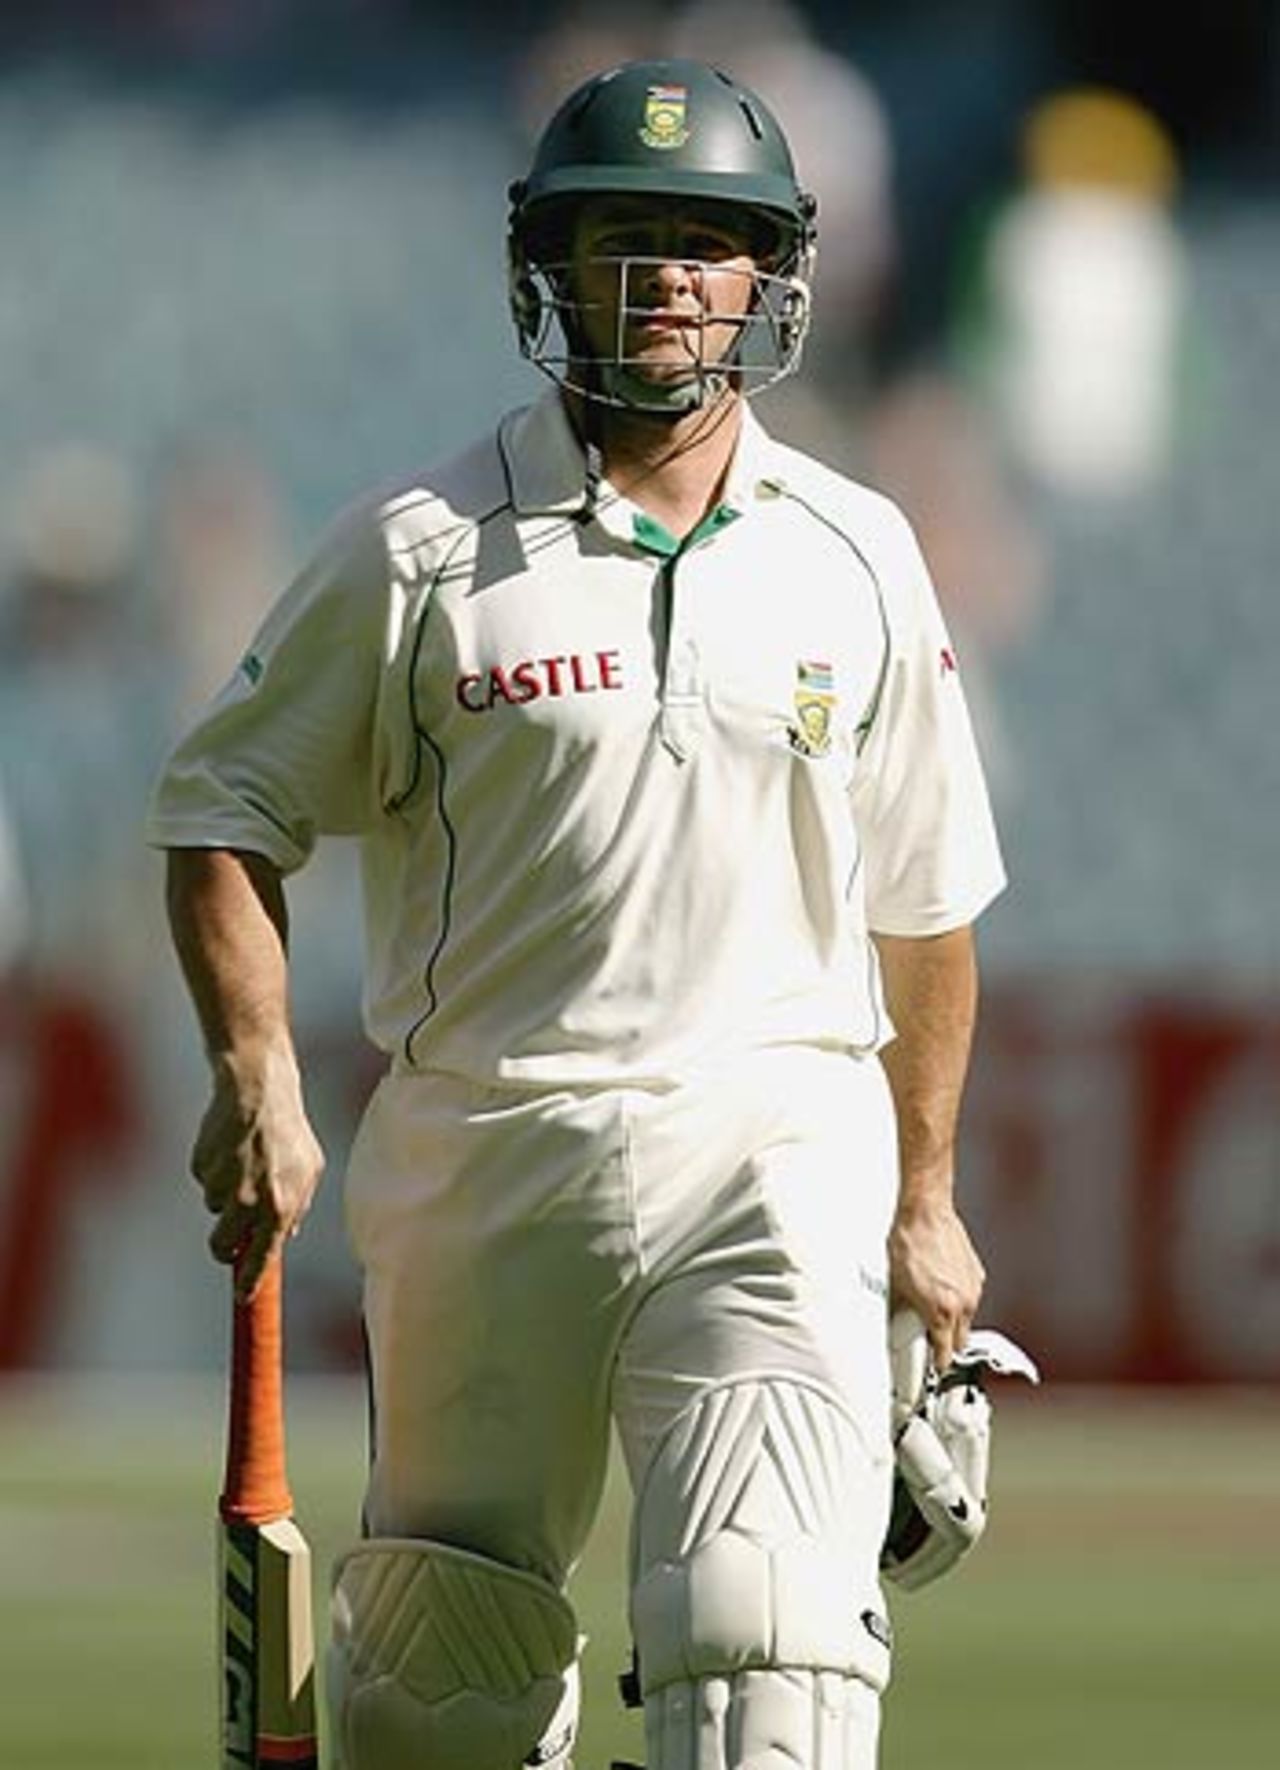 Mark Boucher was Shane Warne's third wicket of the evening as South Africa ended the day on 99 for 6, Australia v South Africa, 2nd Test, Melbourne, 4th day, December 29, 2005